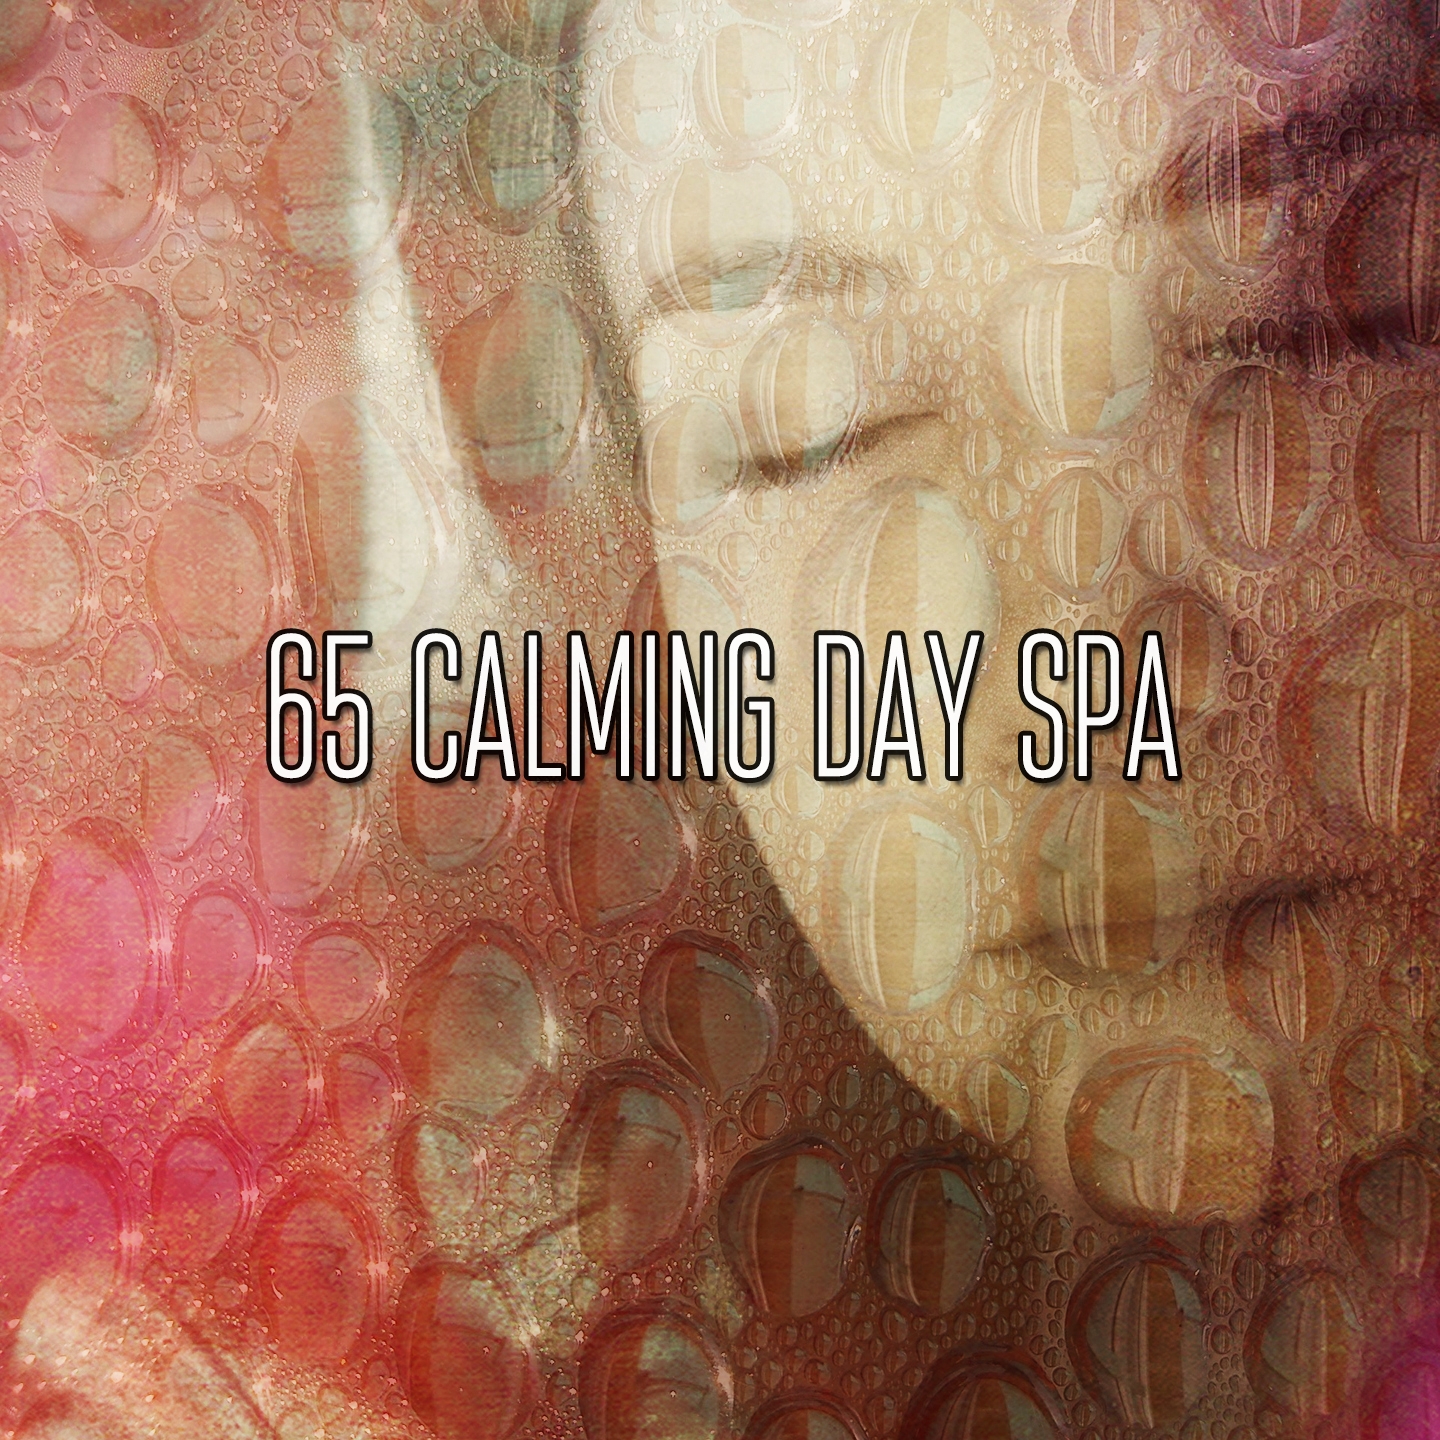 65 Calming Day Spa